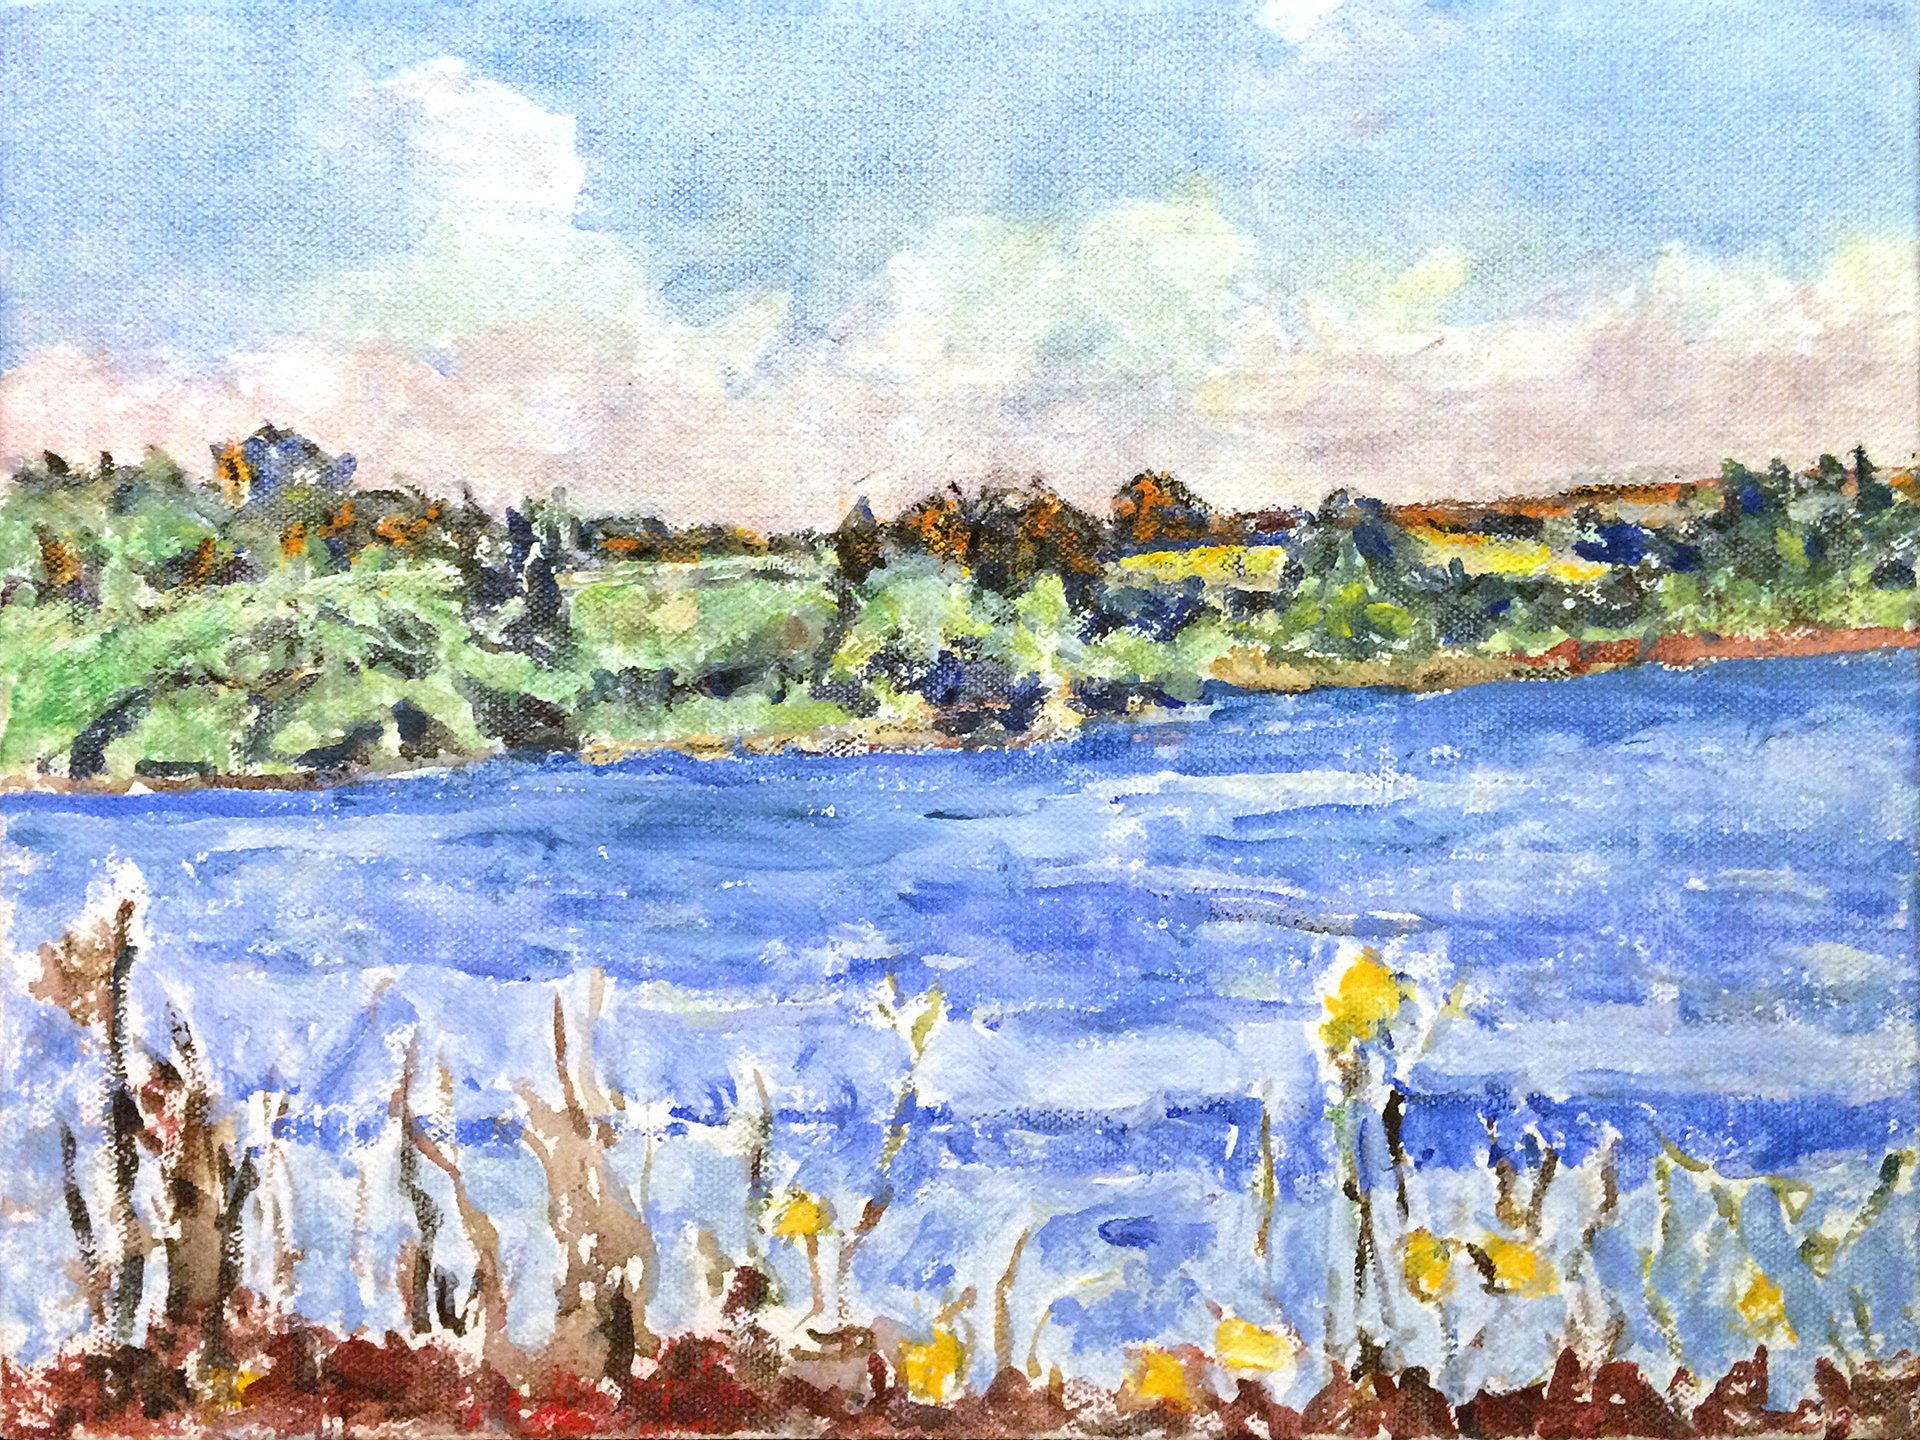 Yellow Flowers on the Lakes Edge, 2011. 9 x 12 in., acrylic on canvas